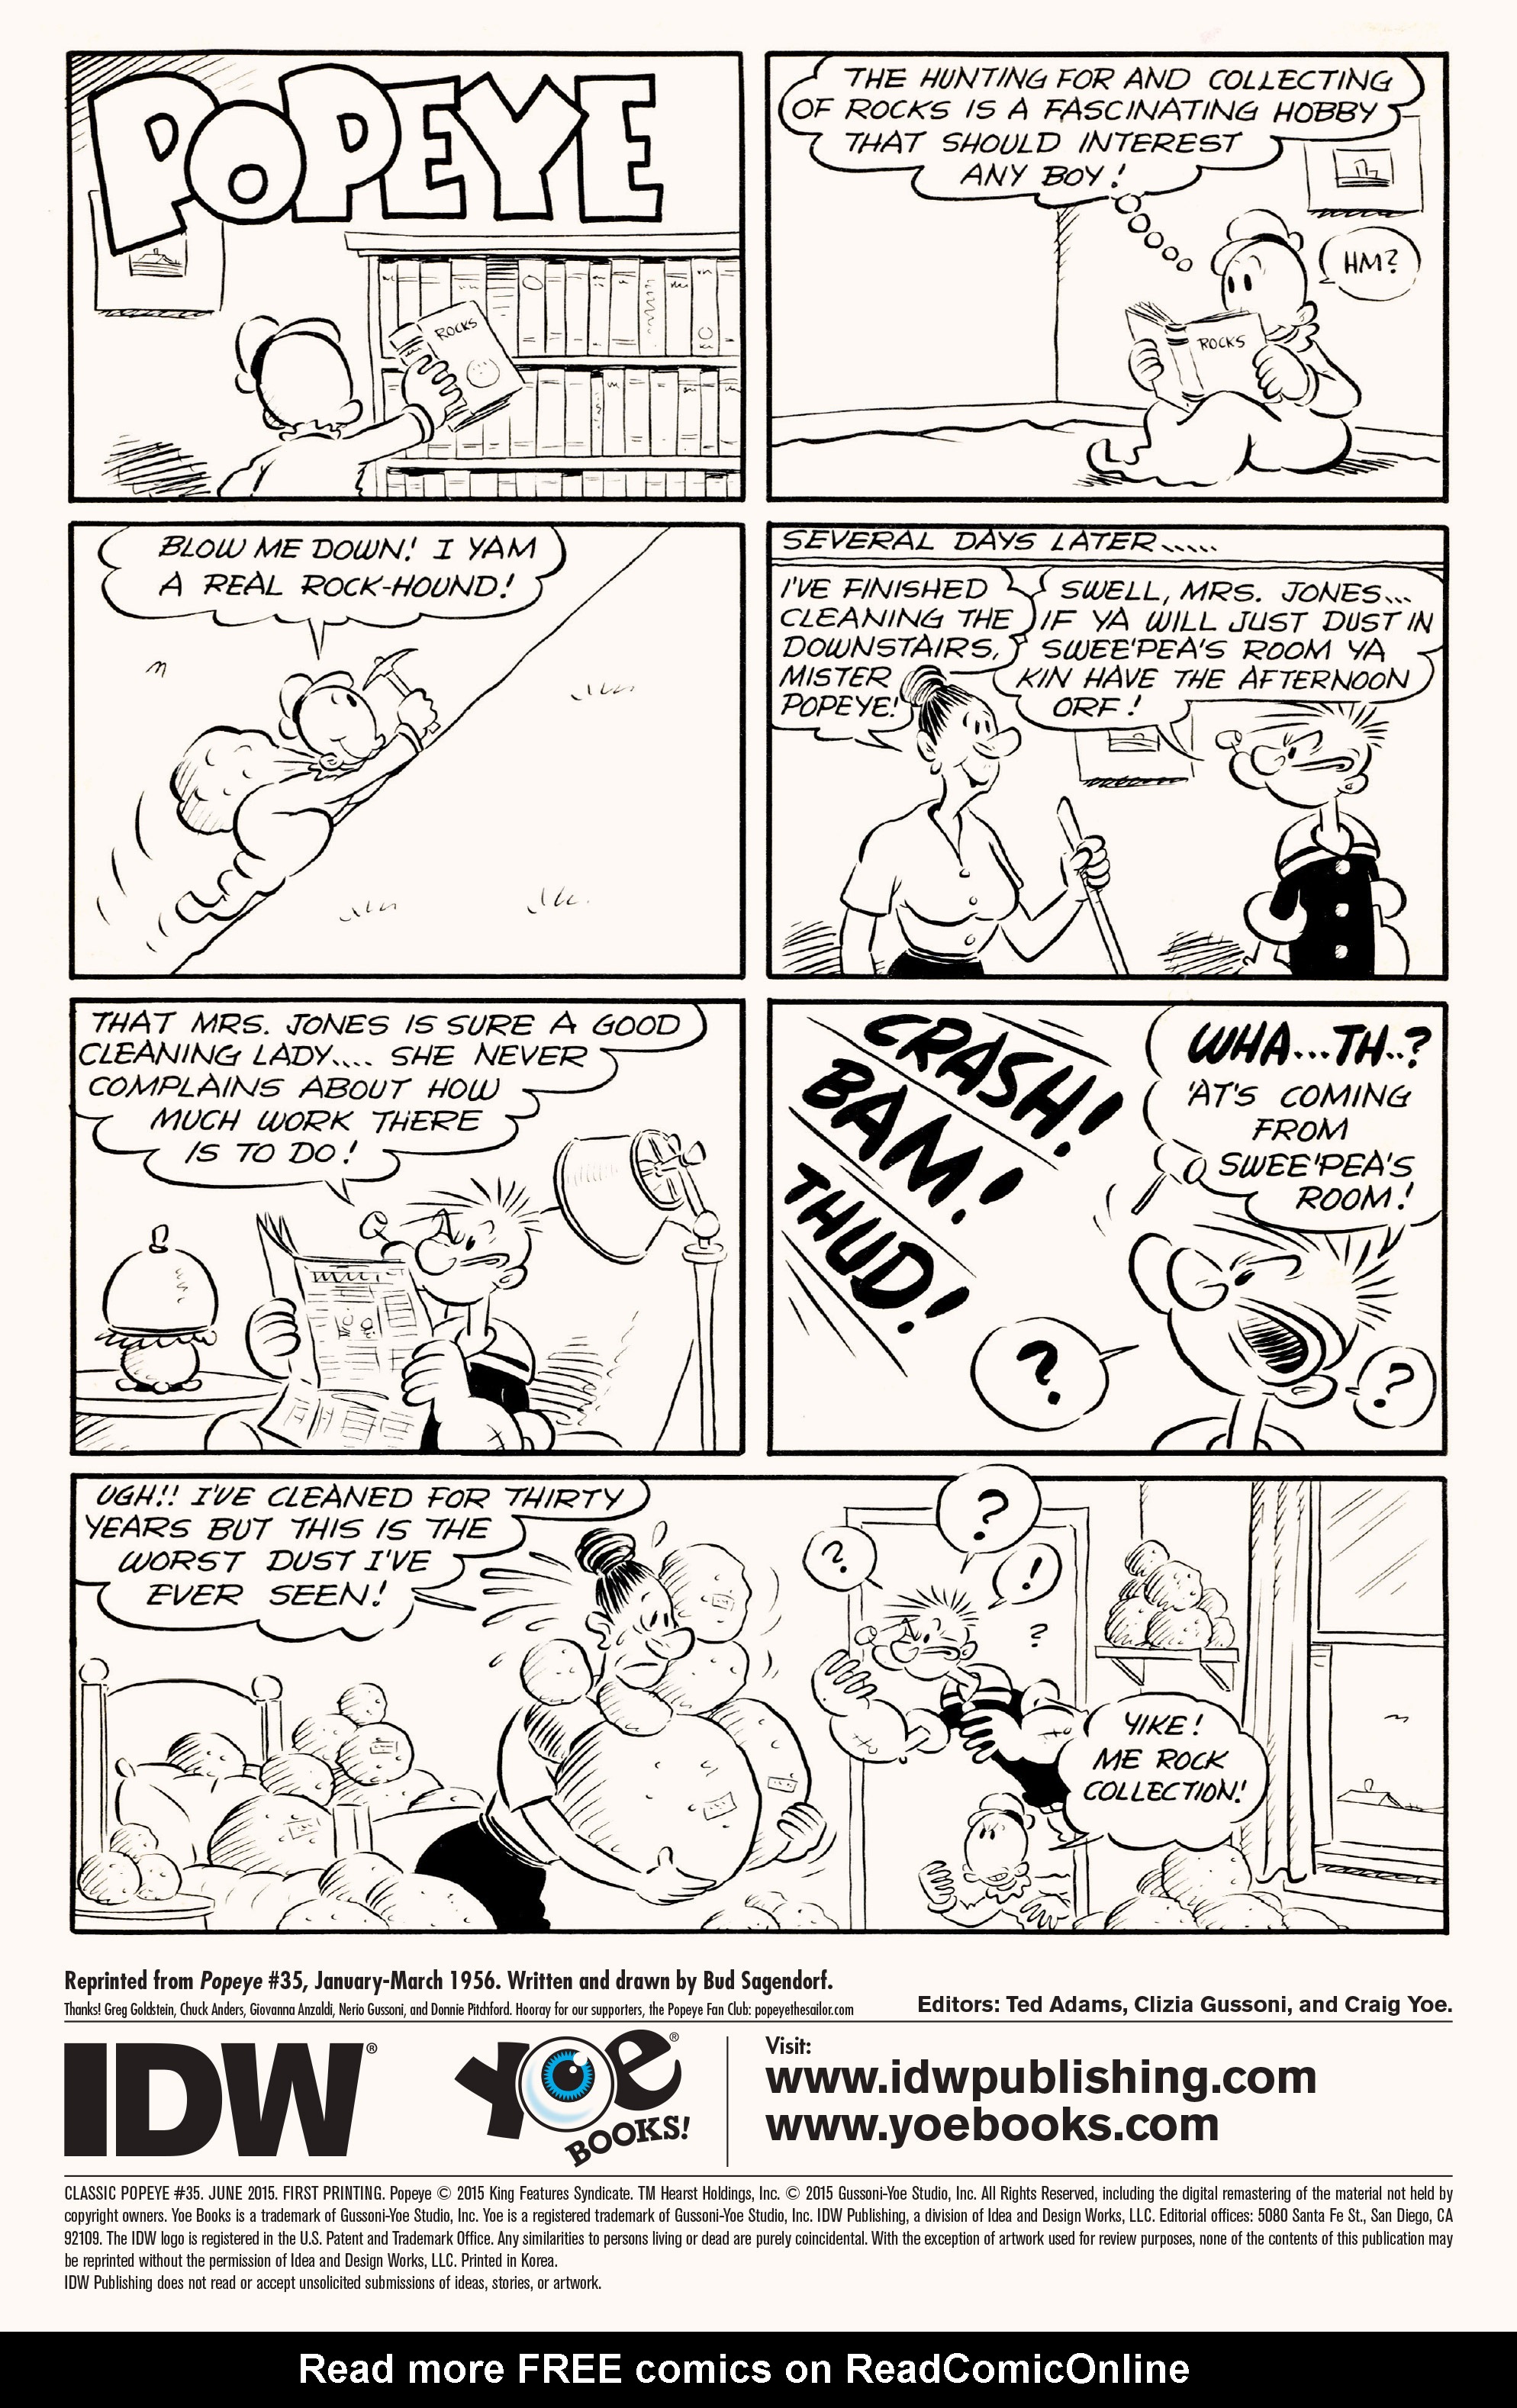 Read online Classic Popeye comic -  Issue #35 - 2